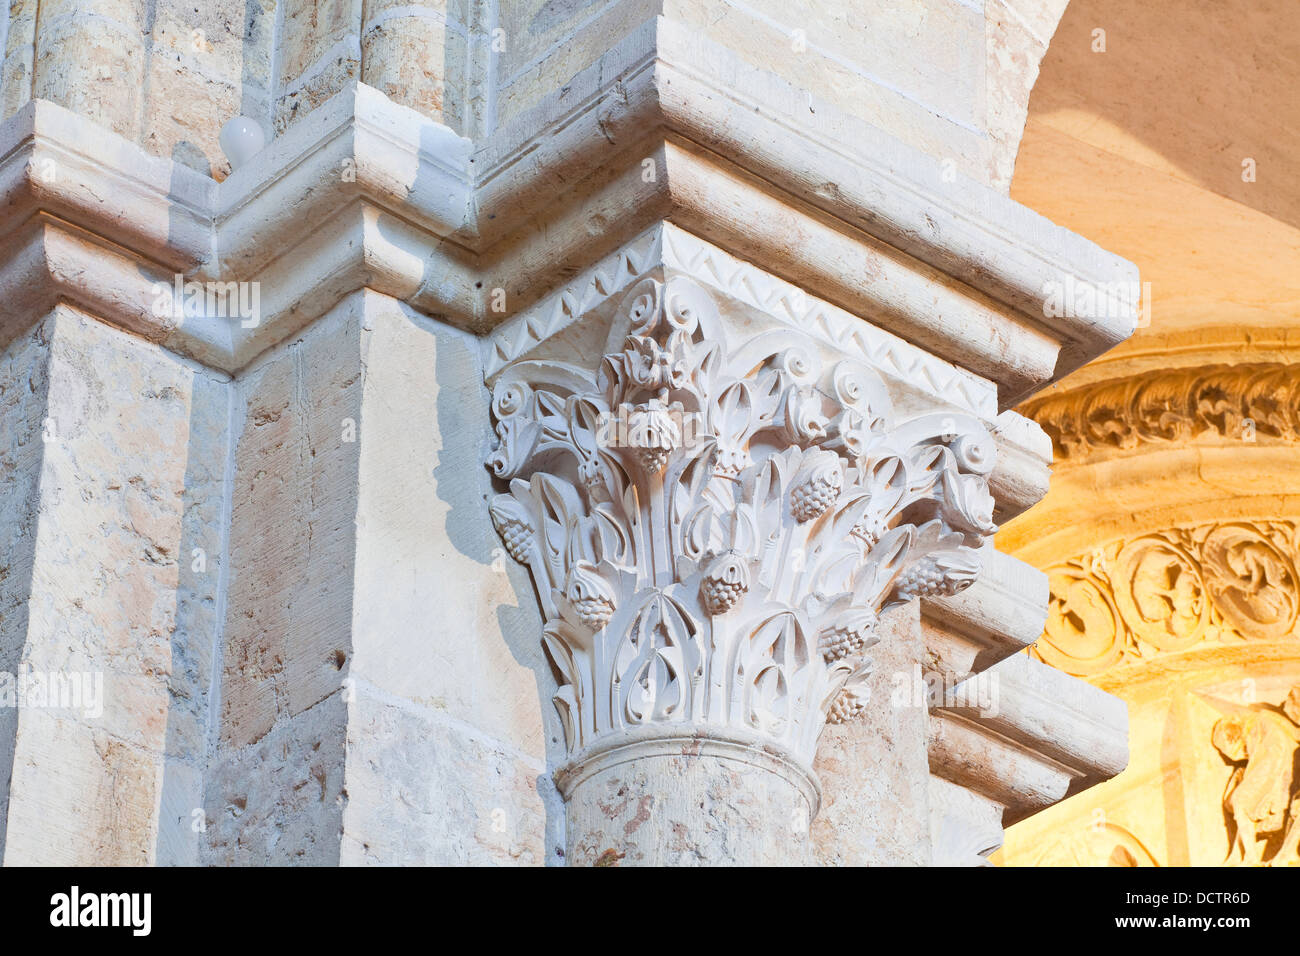 A capital in the Basilique Saint Marie Madeline in the village of Vezelay, France. Stock Photo